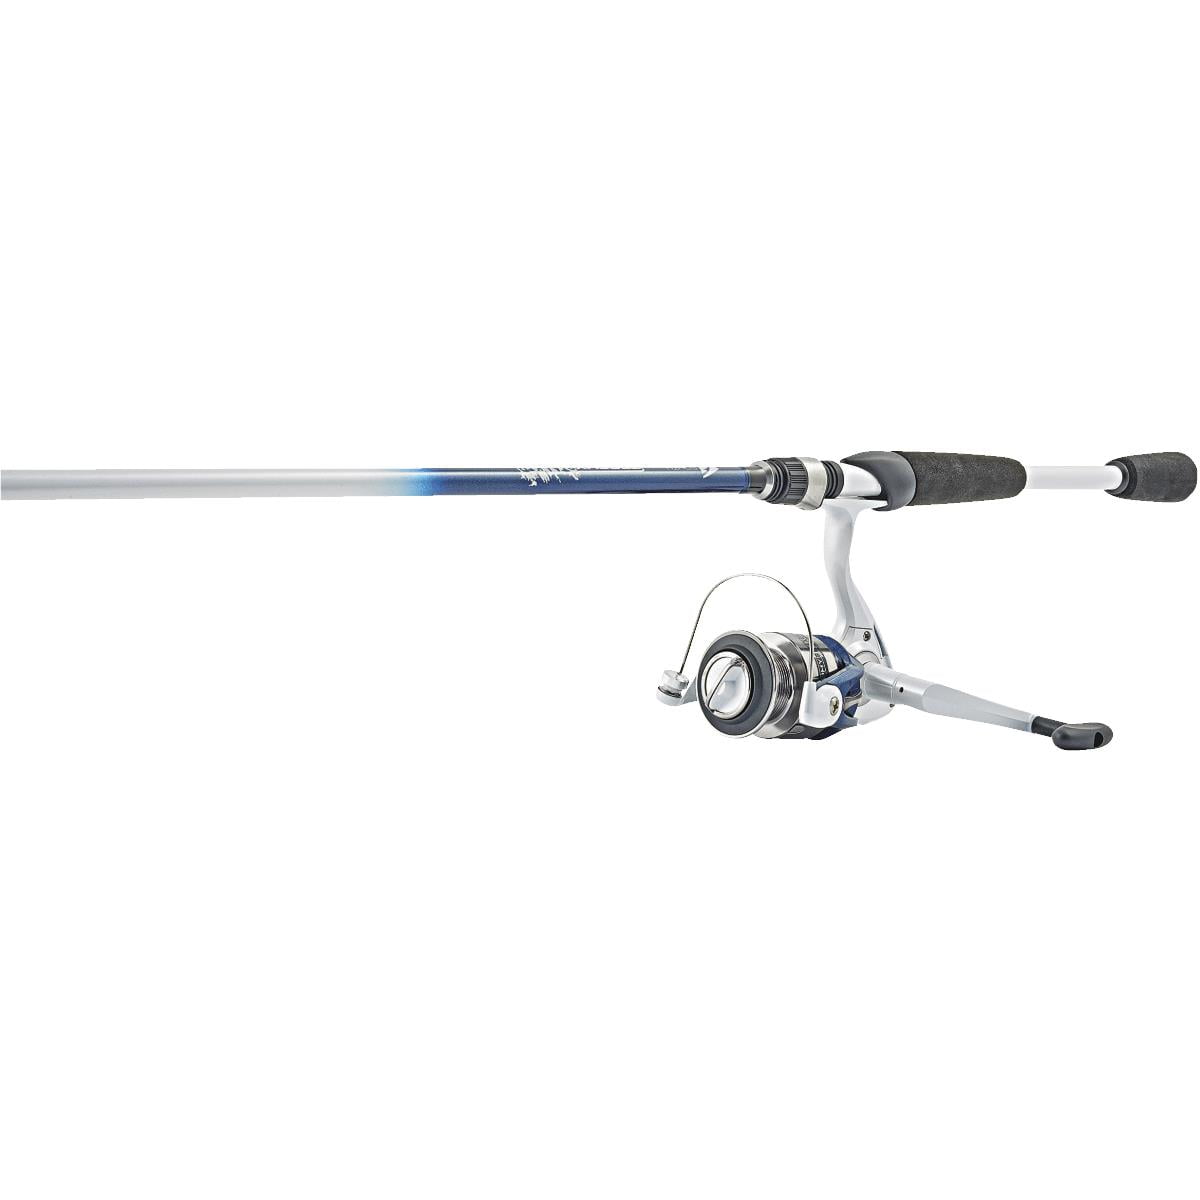 Fishing Rod and Reel Combos Portable Pen, 36 Inch Mini Telescopic Pocket  Fishing Rod and Reel Combos Travel Fishing Rod Set for Ice Fly Fishing Sea